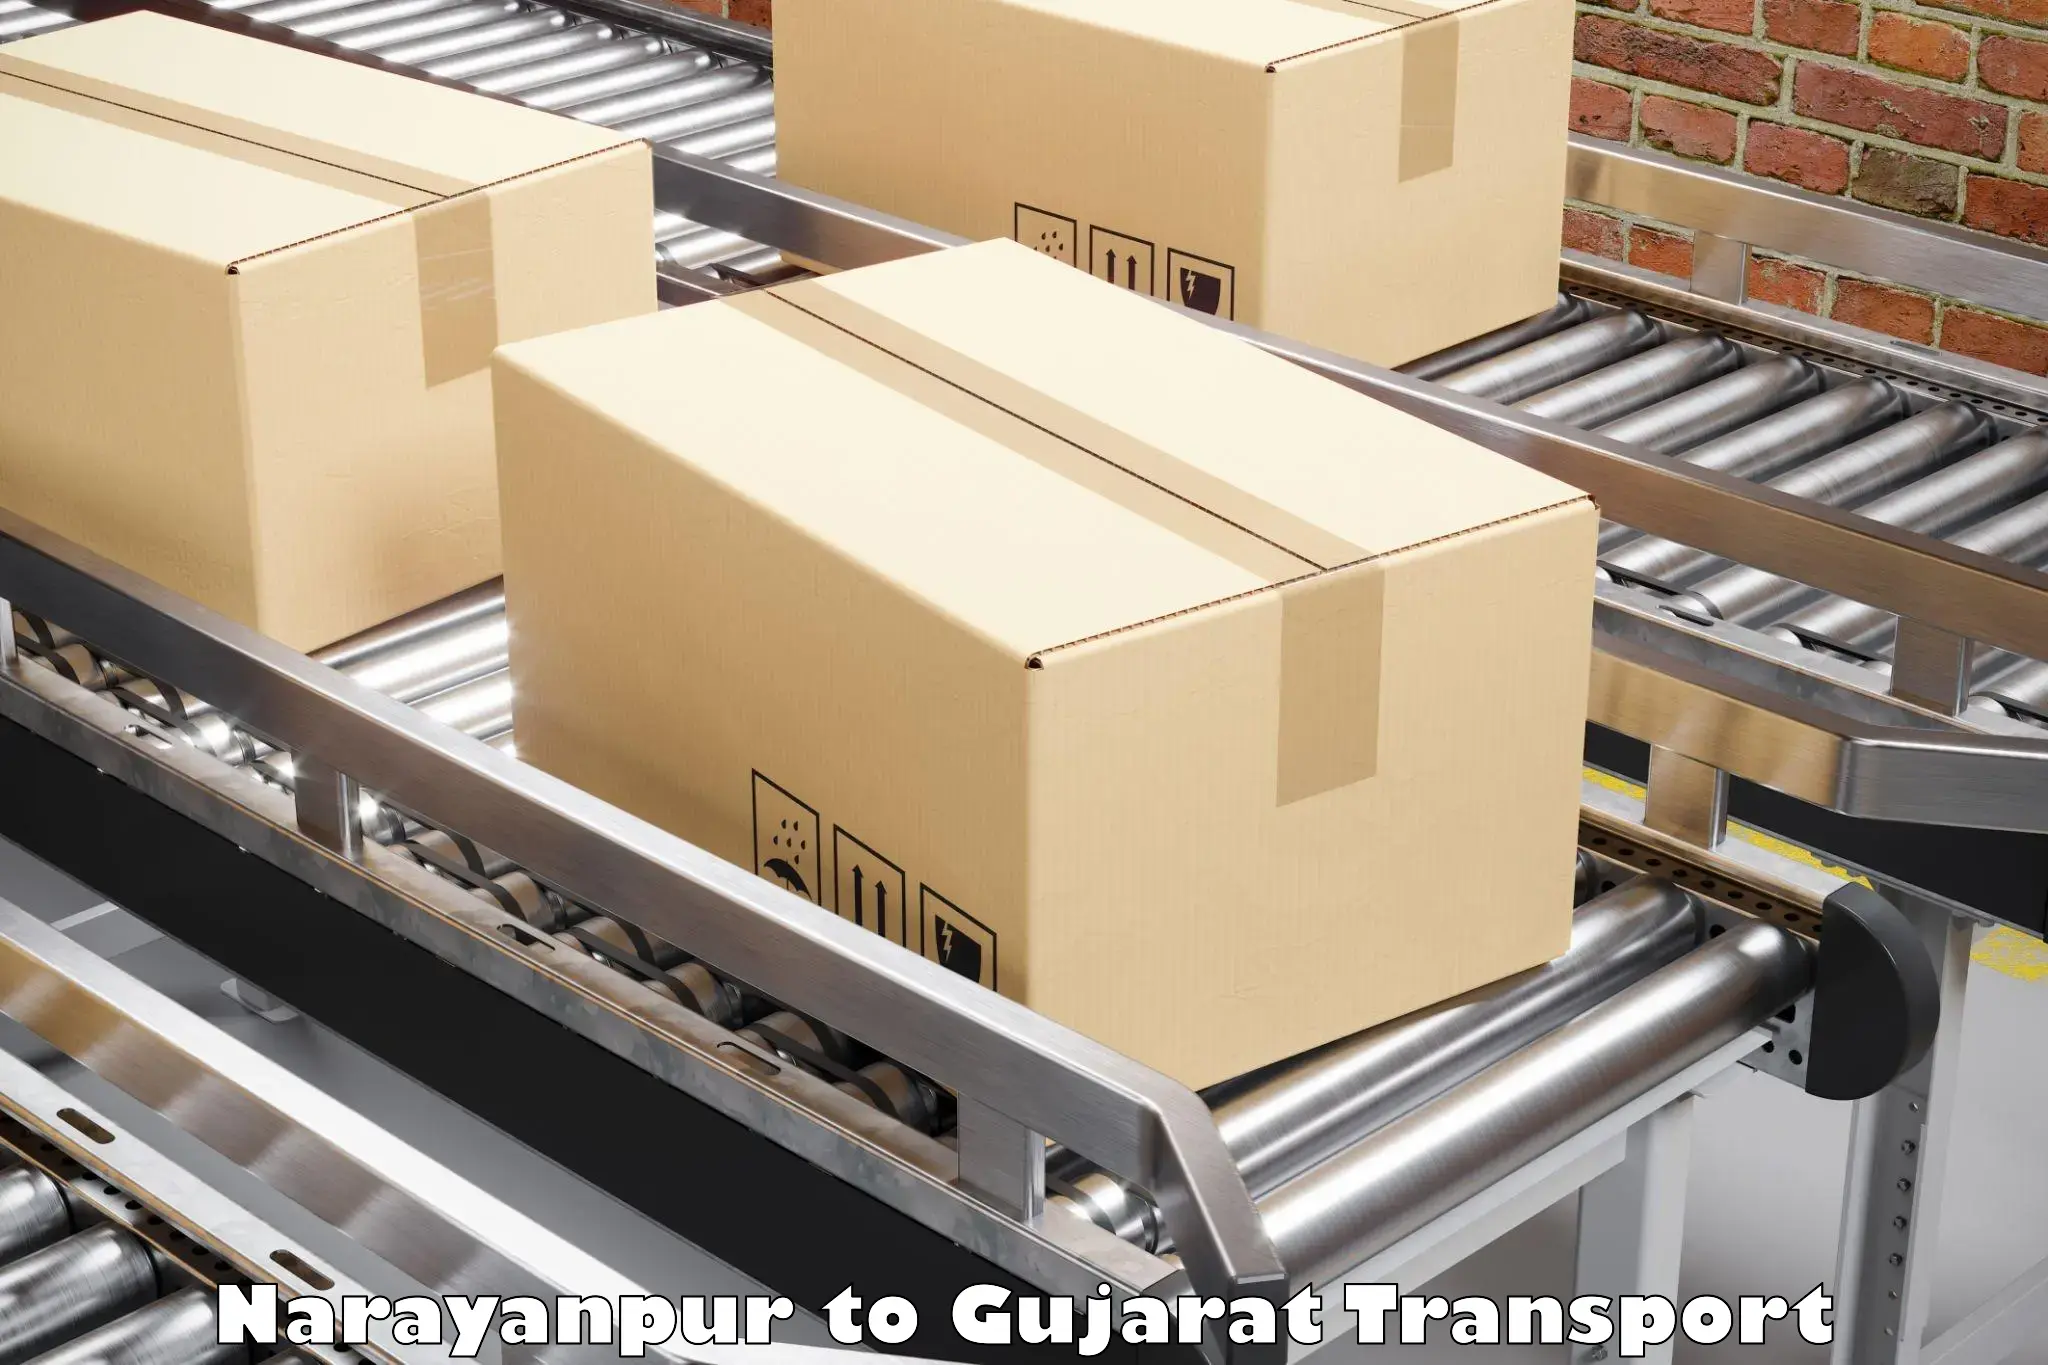 Daily parcel service transport Narayanpur to Ankleshwar